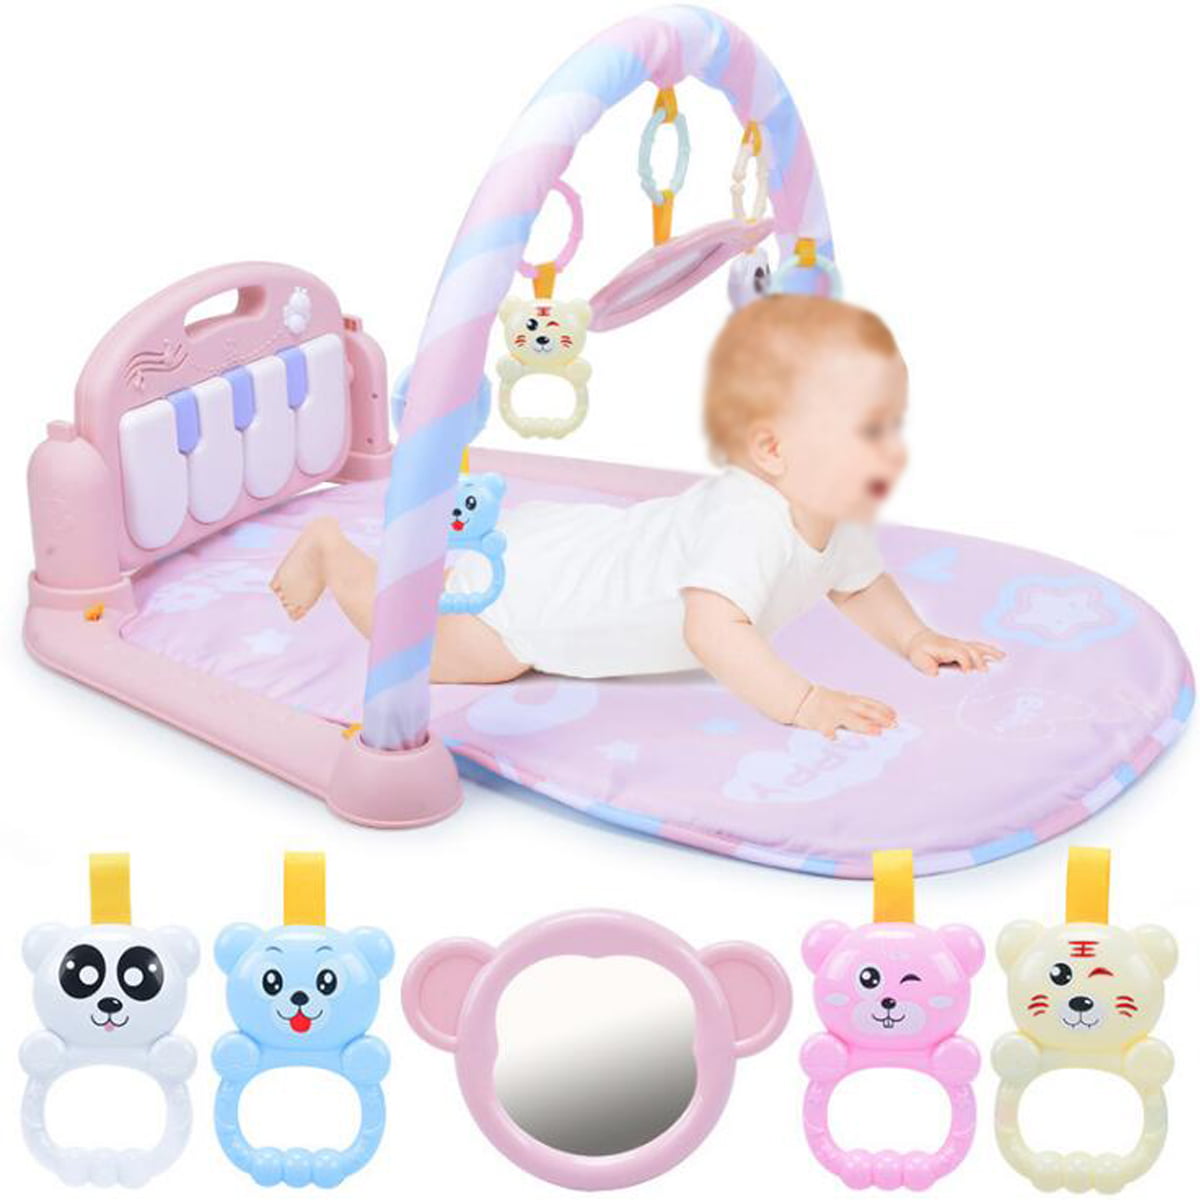 Newborn Musical Play Soft Piano Gym Mat Activity Play Gym Baby Gift Toy Bedroom 